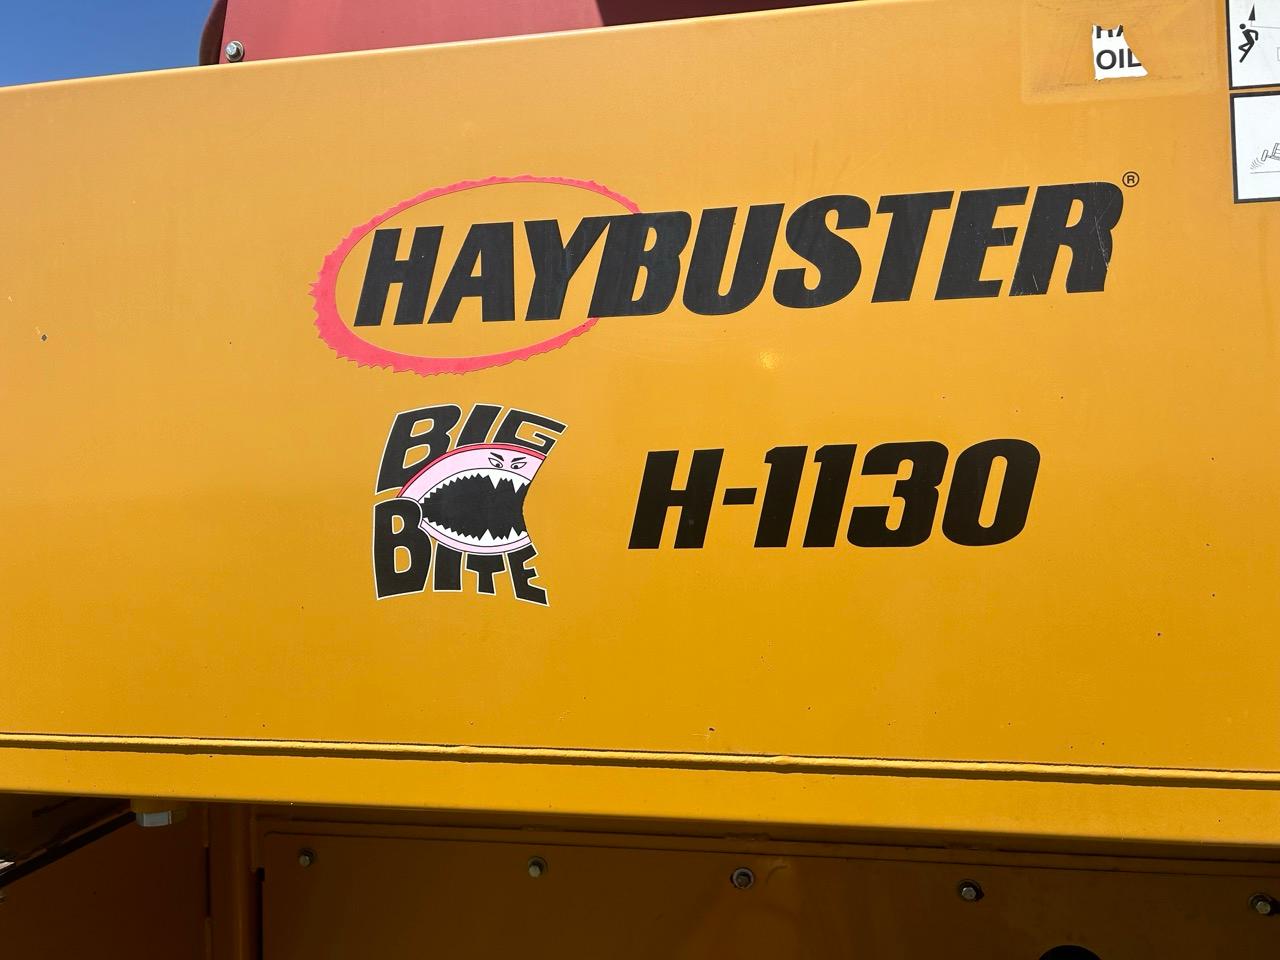 Hay Buster H1130